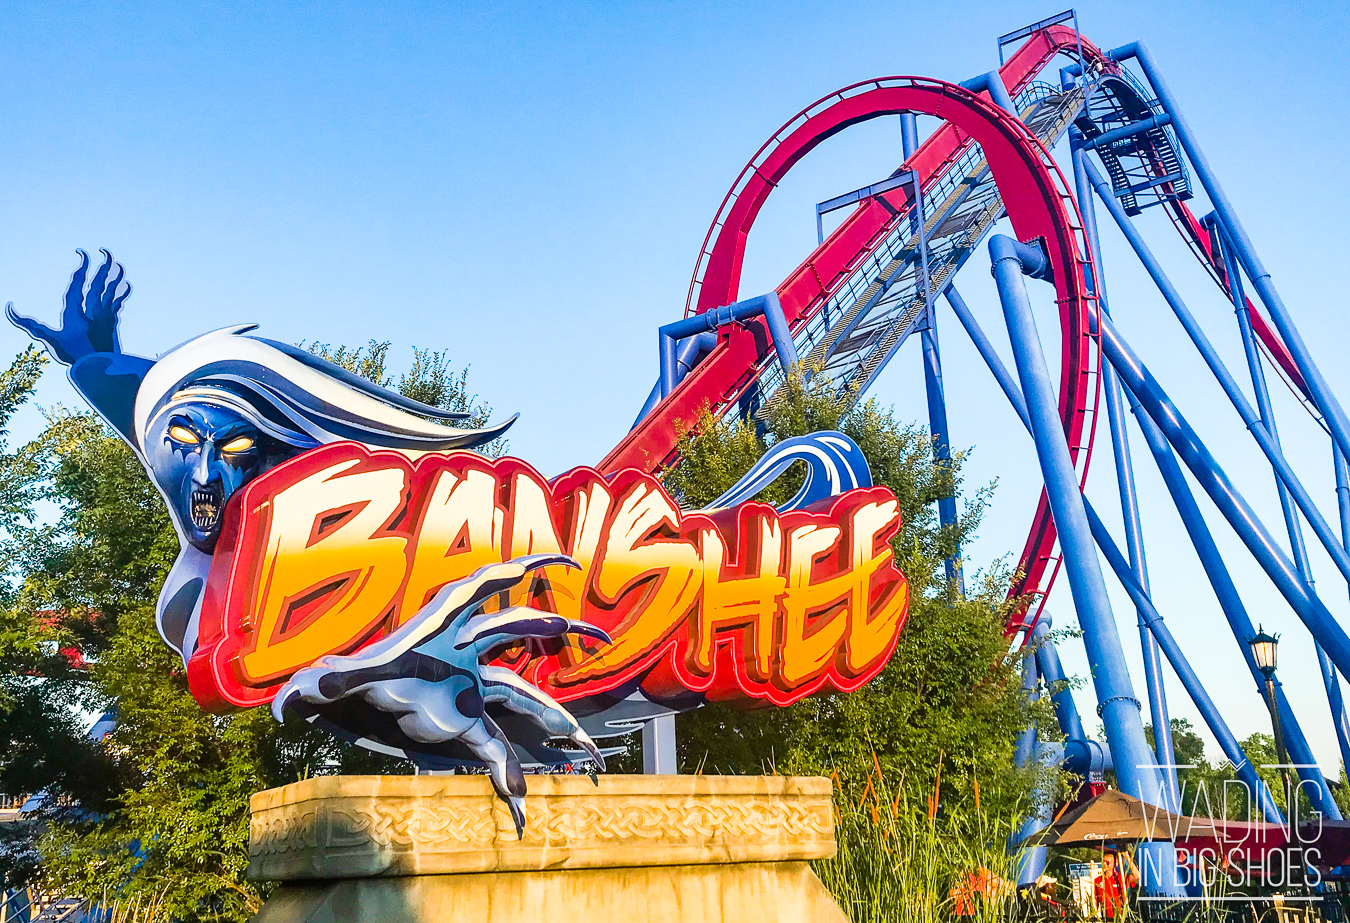 Wading in Big Shoes - Just How Scary Are The Roller Coasters at Kings Island? - Ride Guide & Review